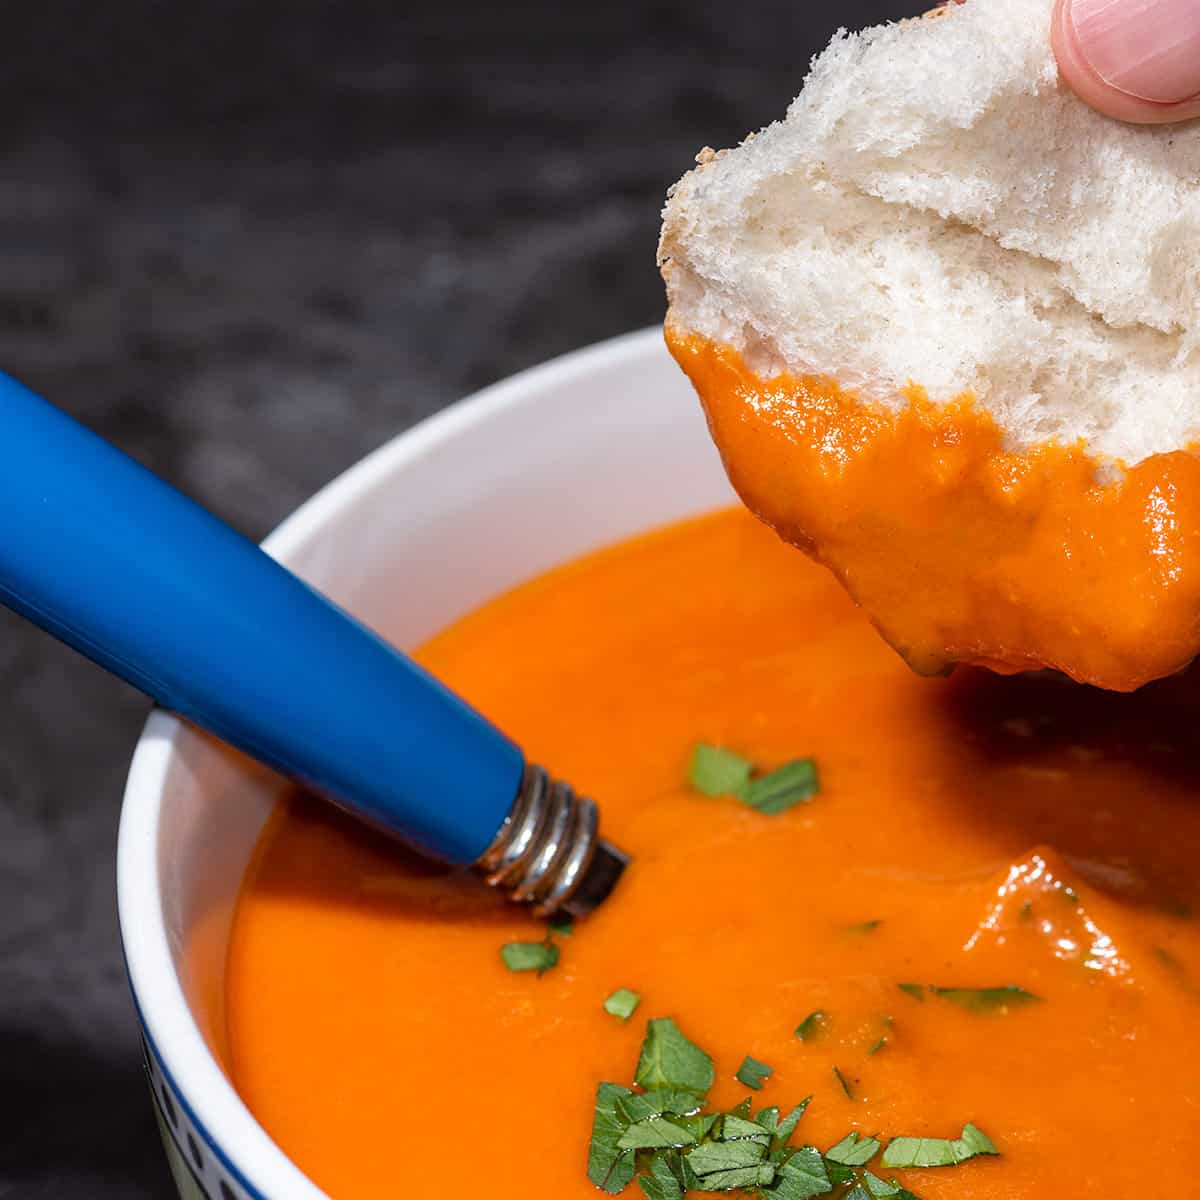 Bowl of vegan tomato soup with bread being dipped.